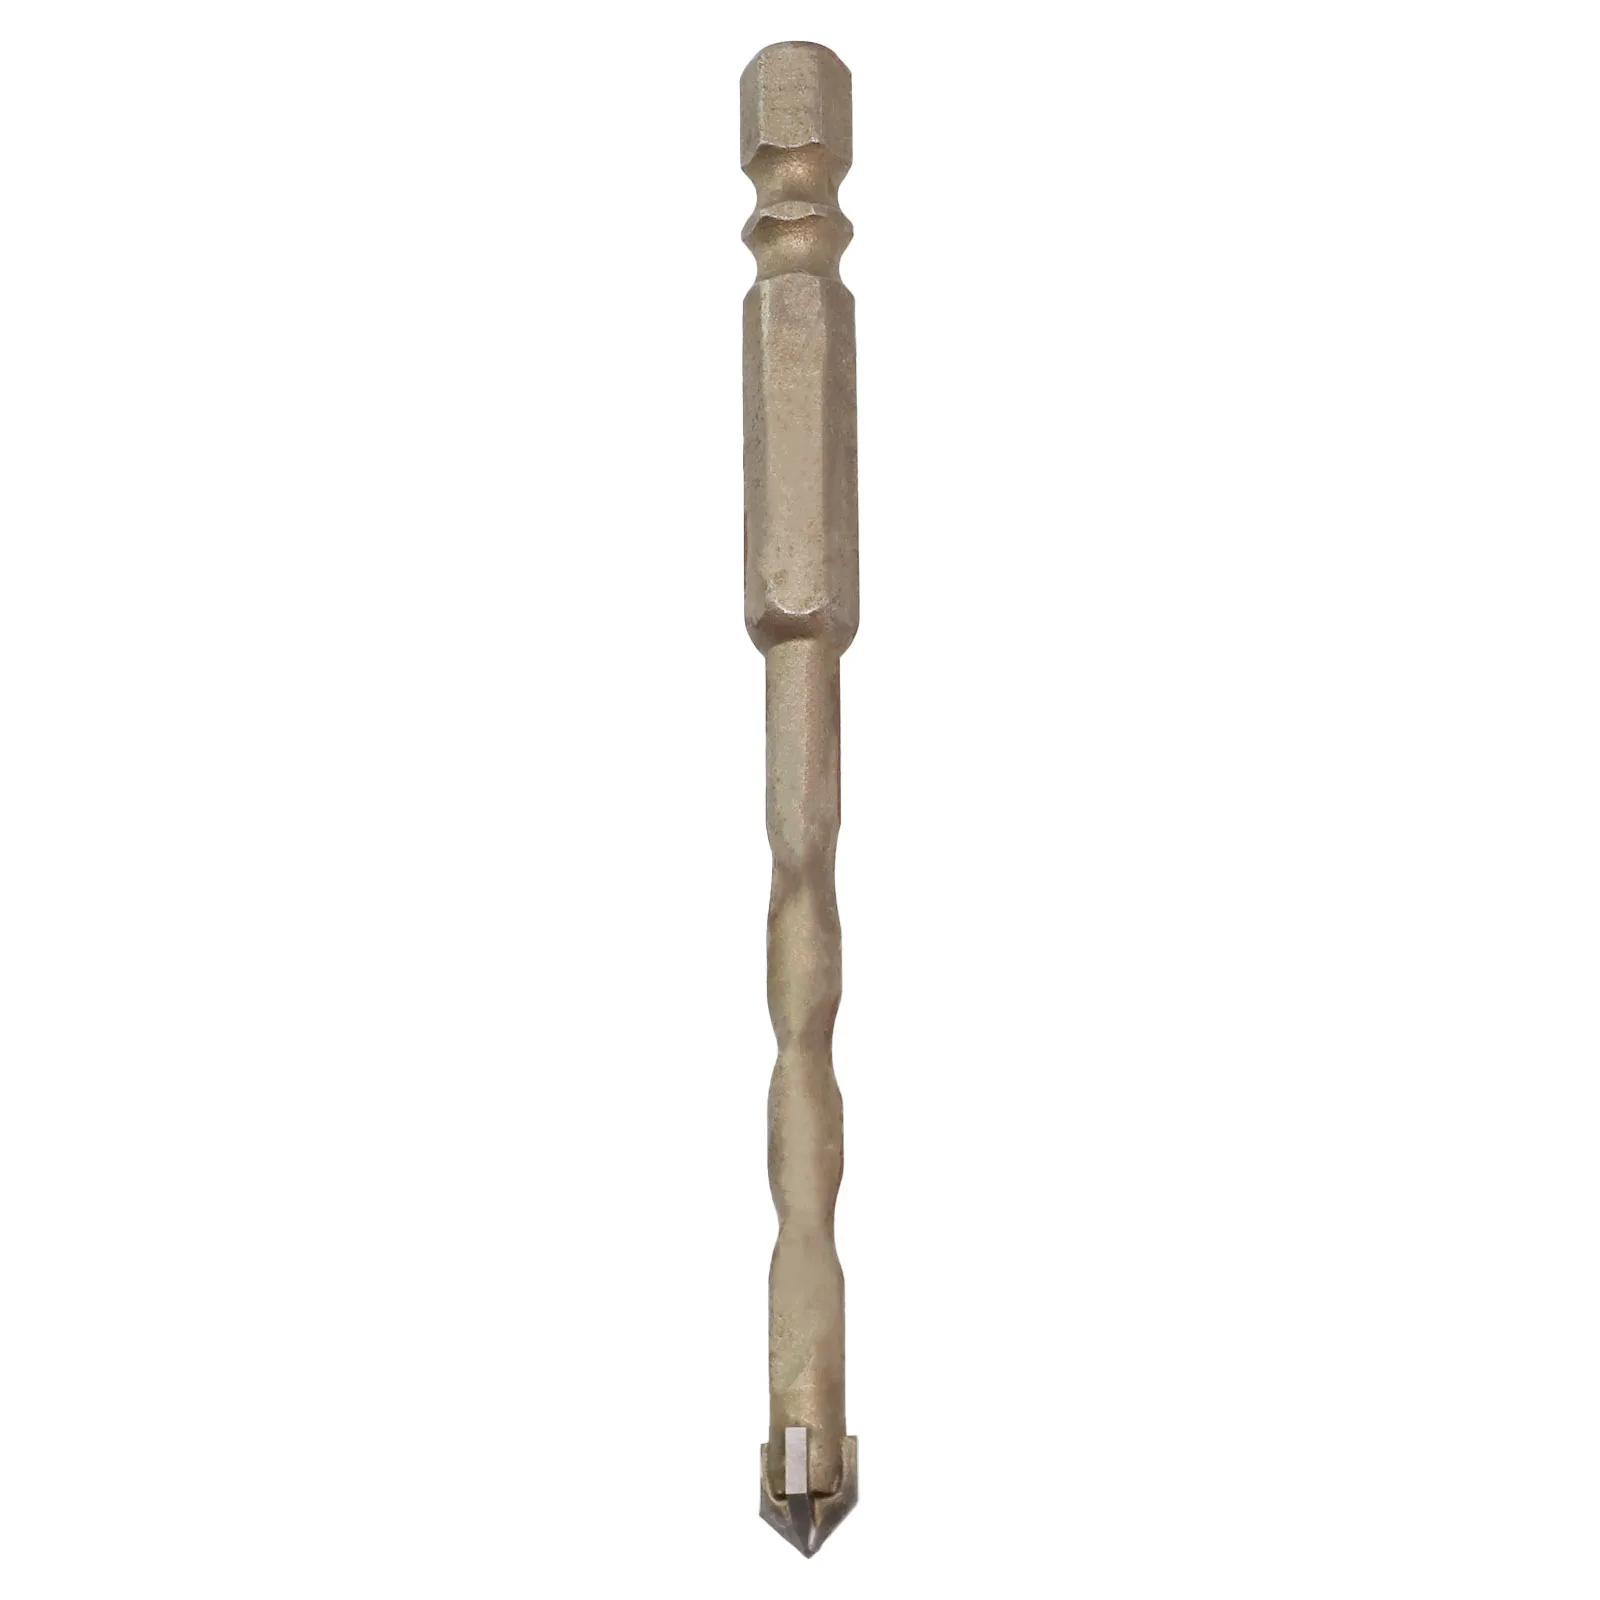 Tile Drill Bits Drill Bit 6/8/10/12mm 98-122mm Hole Cutter Wood Metal Drilling Tools For Glass Ceramic Concrete